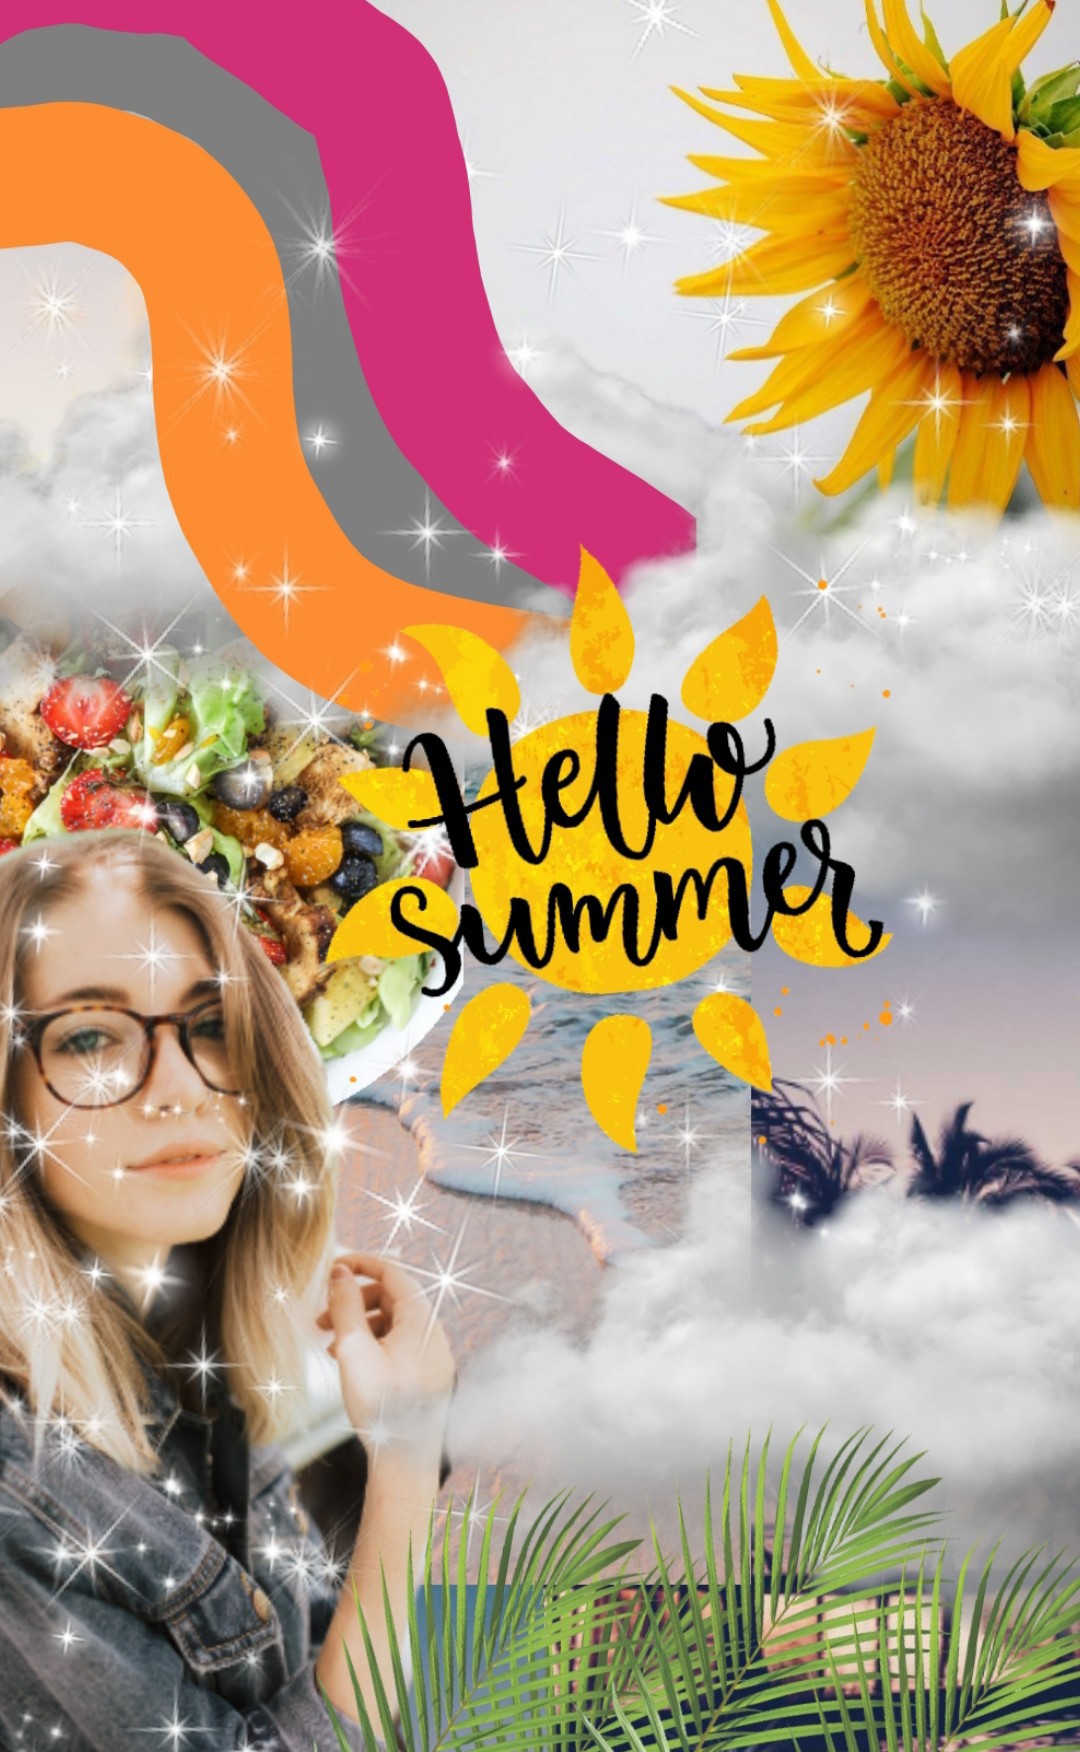 hey guys! hope you like this summer inspired collage!